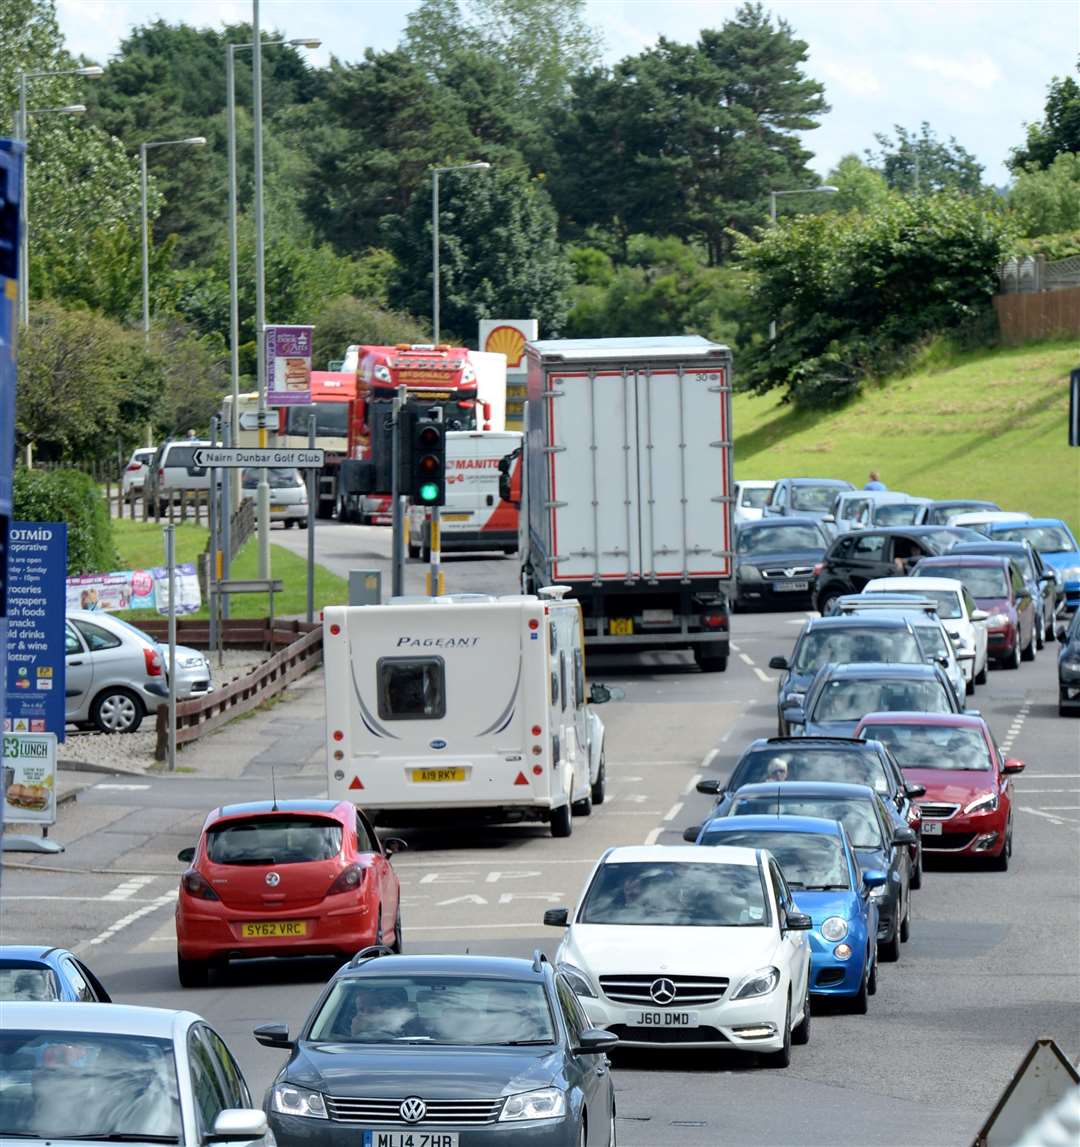 The campaign for a bypass to alleviate traffic in Nairn is growing in momentum.